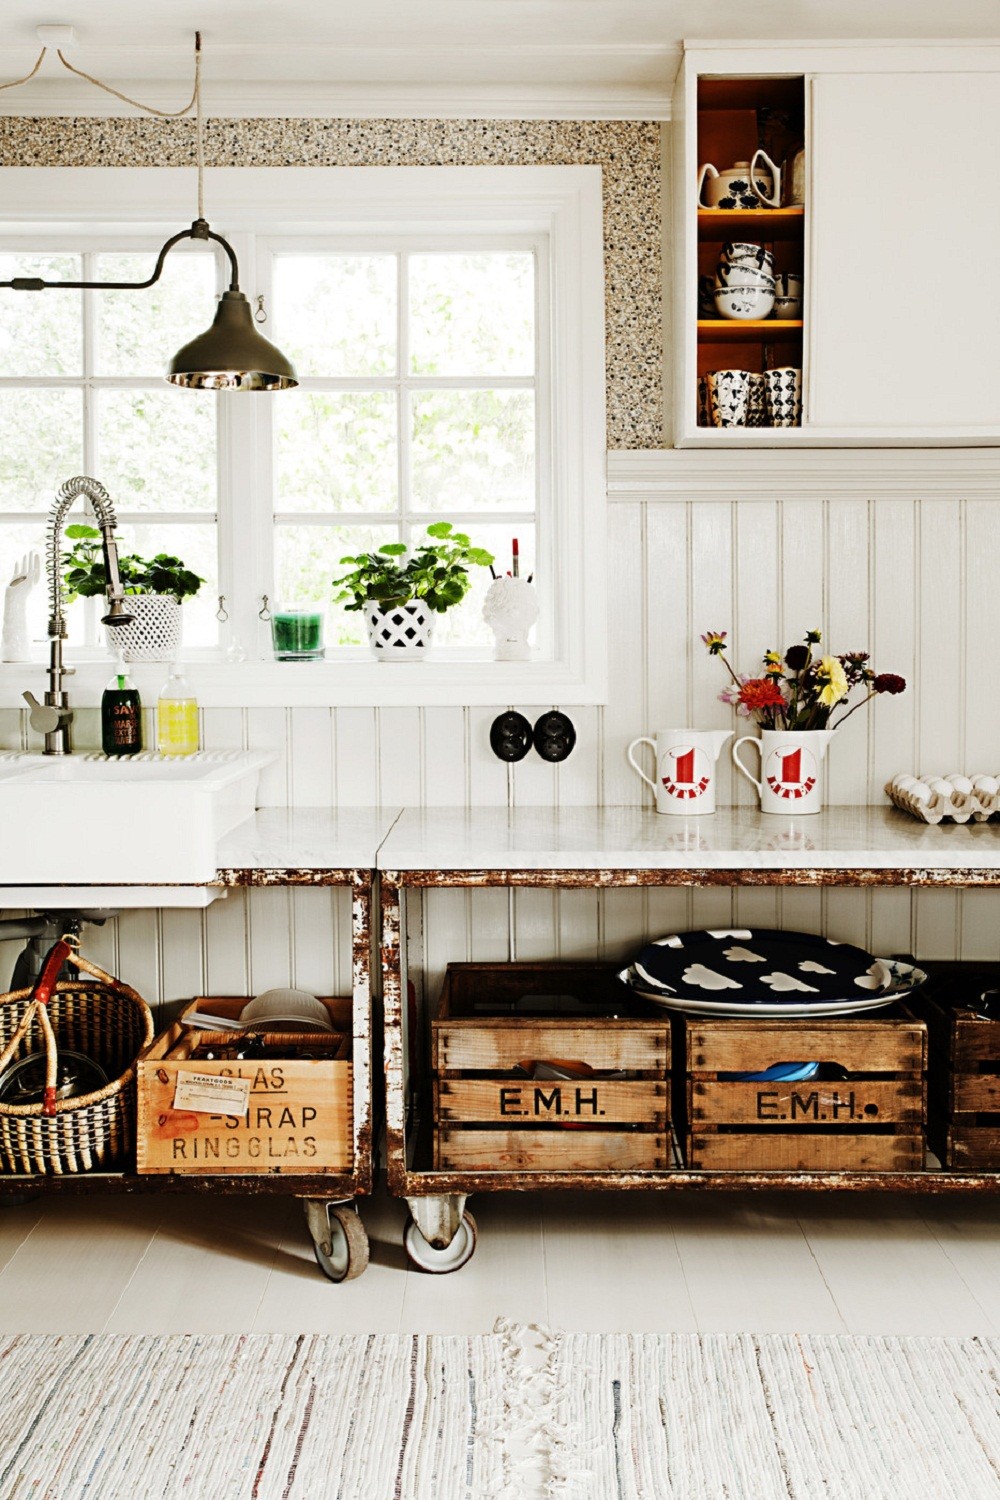 Charming Storing and Decorating DIY Ideas in Vintage Style